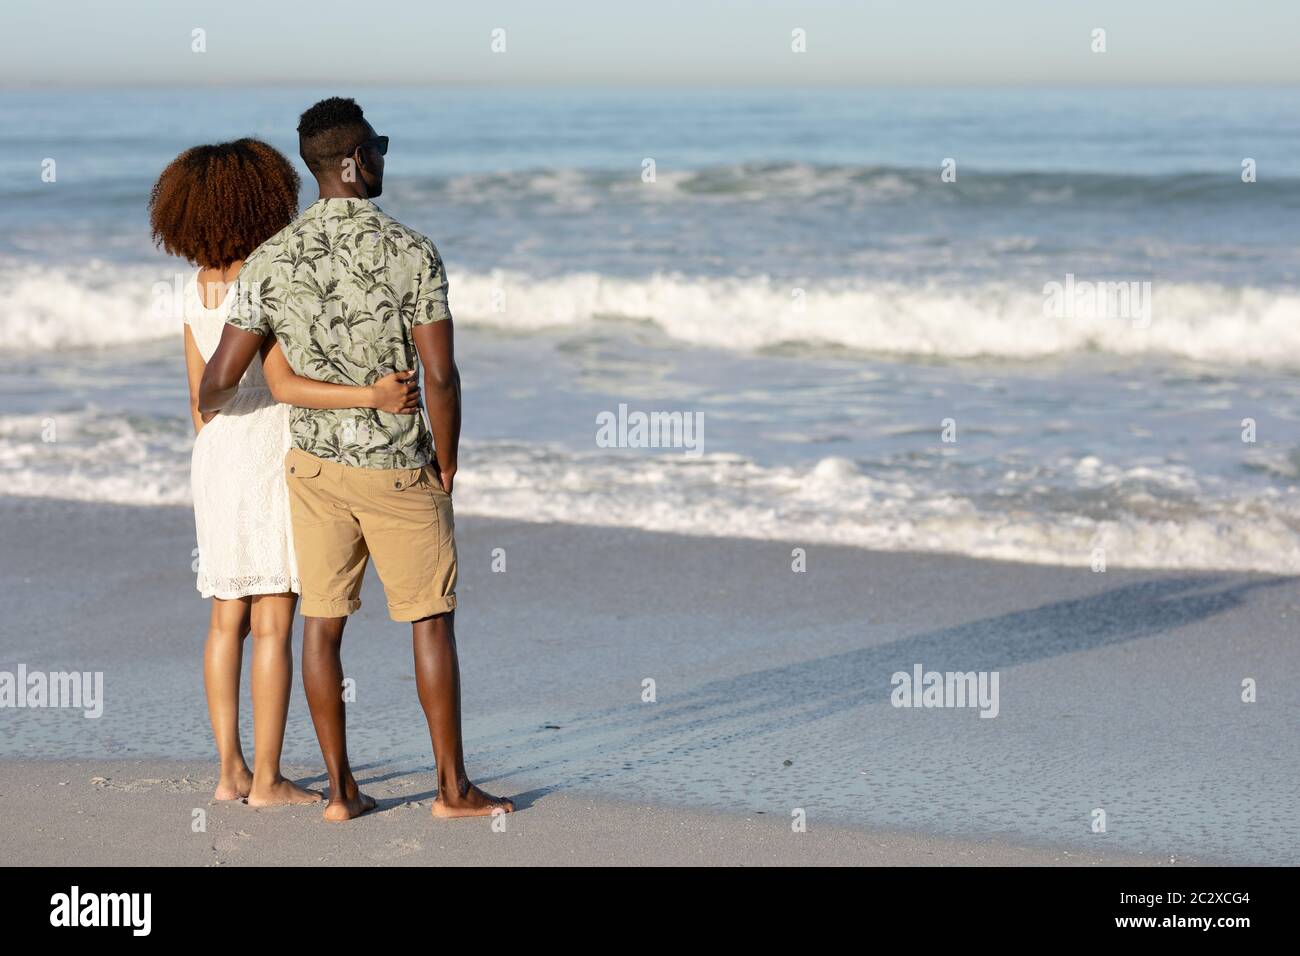 A mixed race couple admiring the view and holding each other on beach Stock Photo